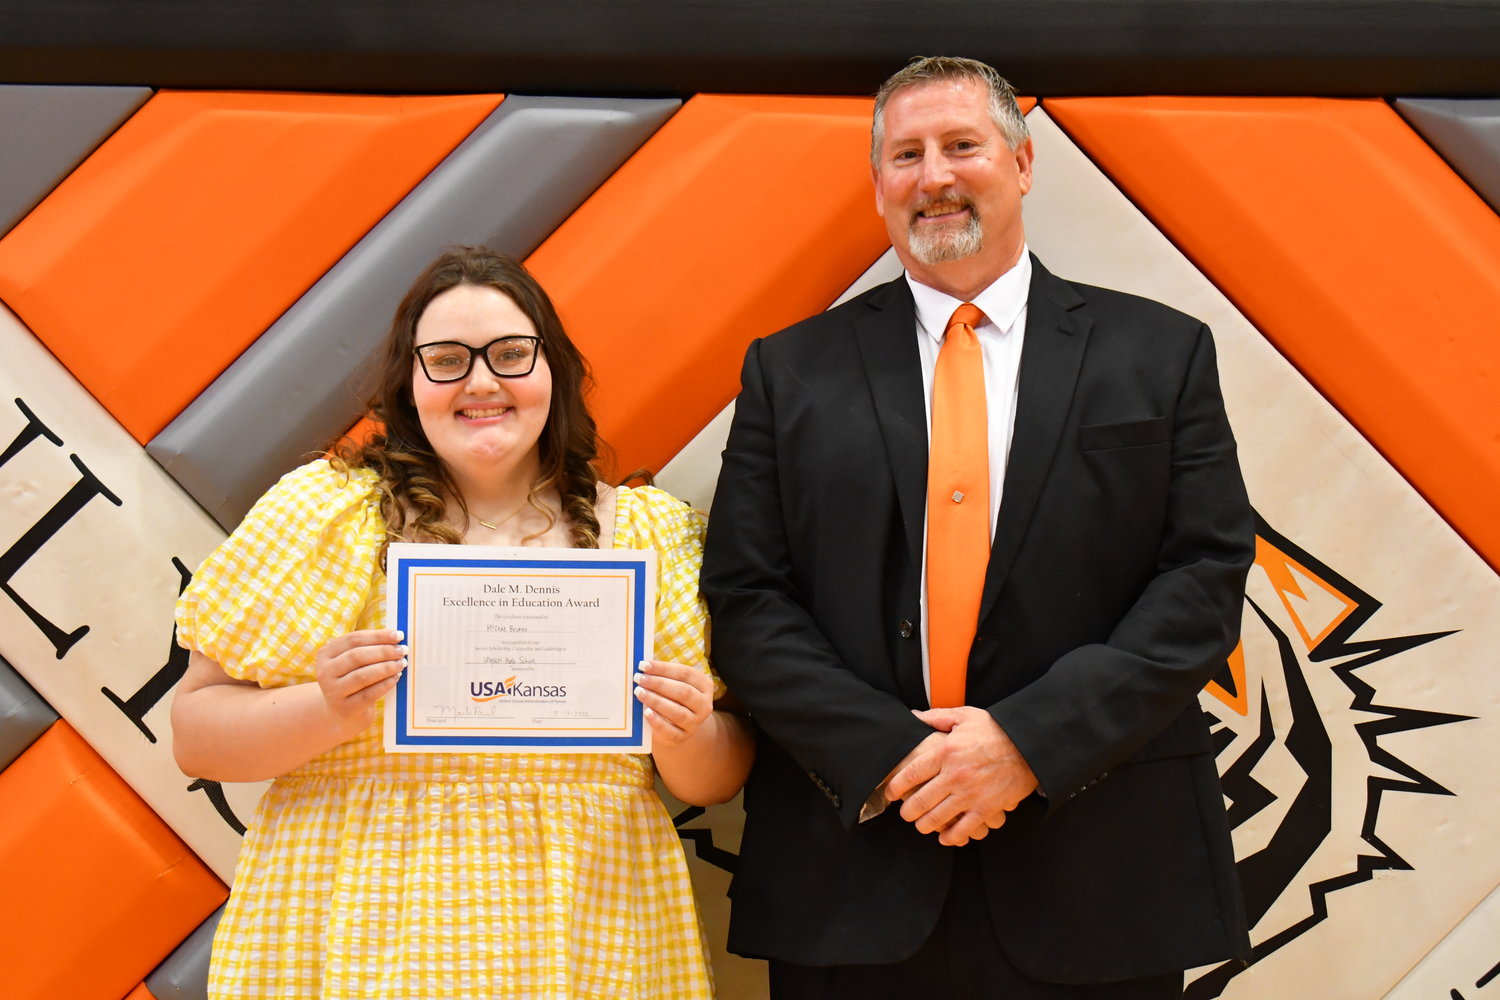 Senior Awards — McCrae Becker was given the Dale M. Dennis Excellence in Education Award from Mark Paul on Friday, May 13, 2022.